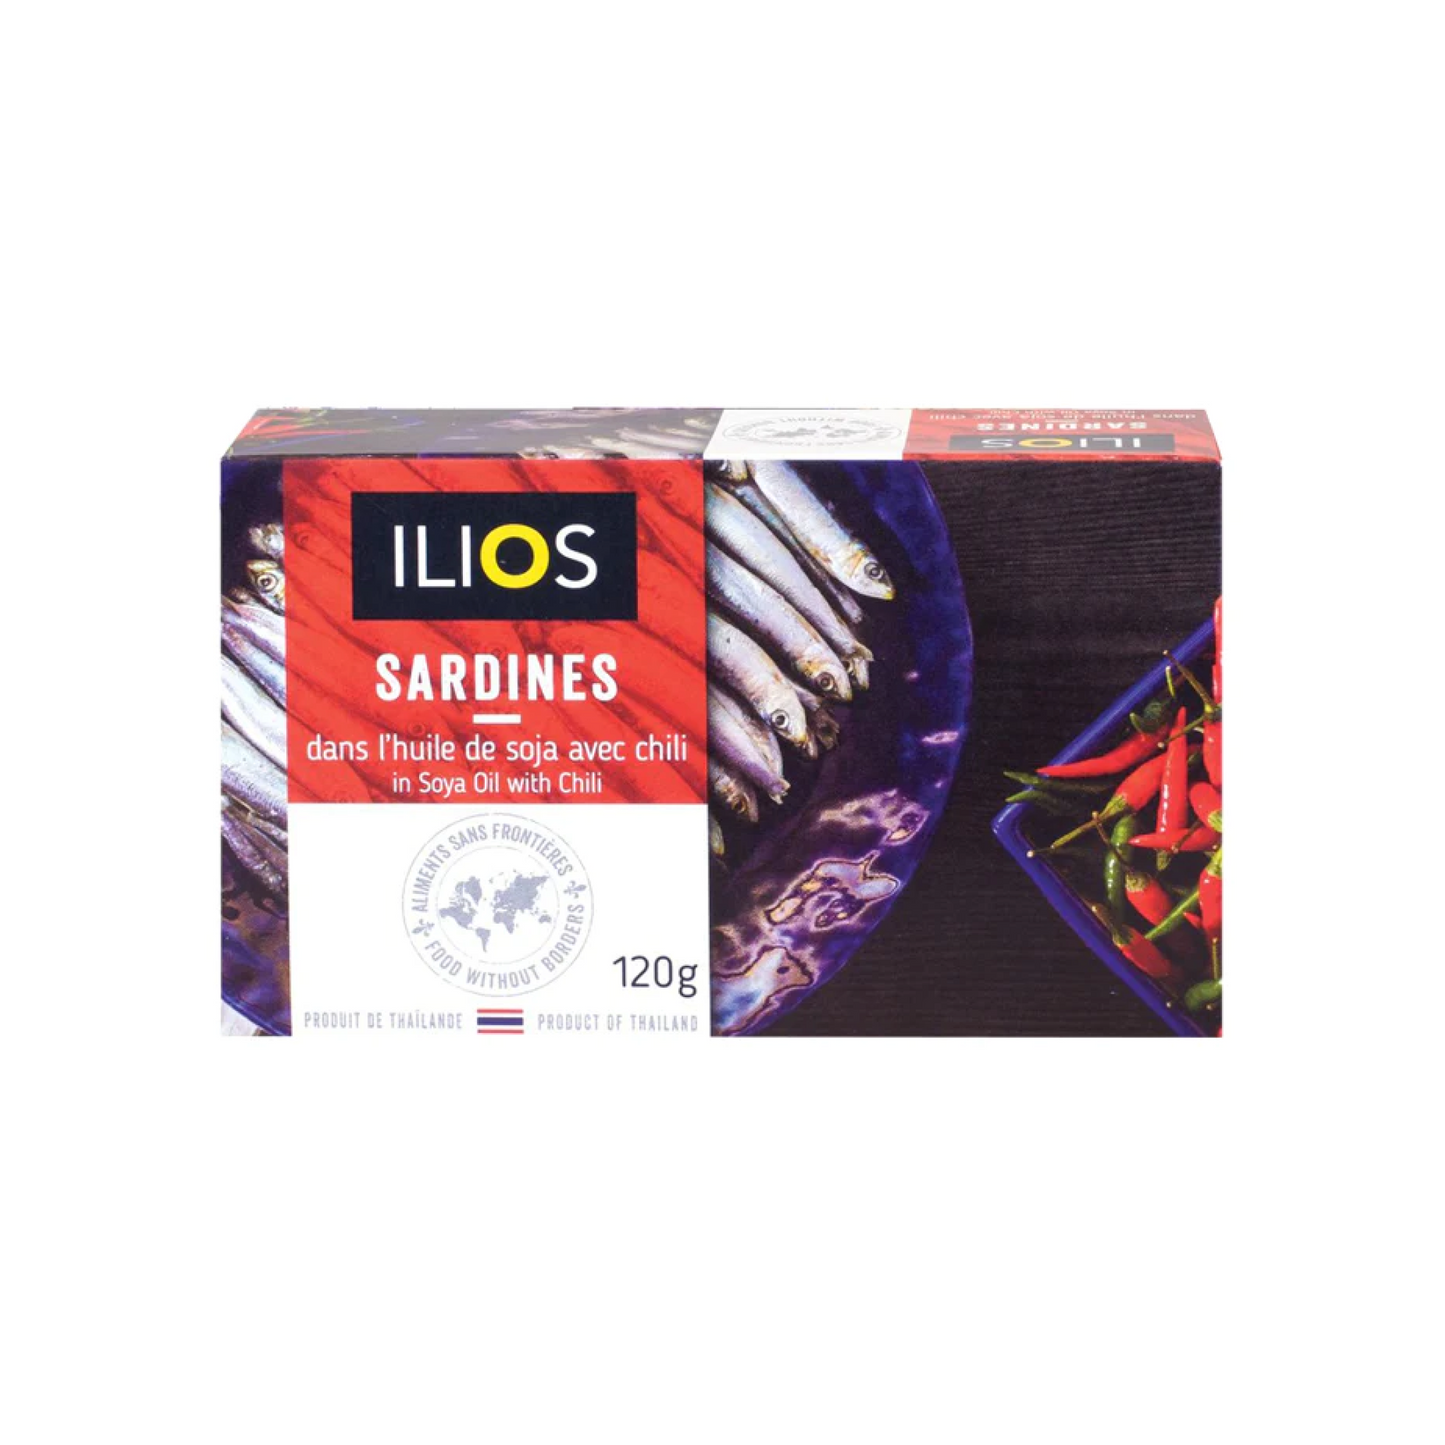 Ilios Sardines in Soya Oil with Chili 120g